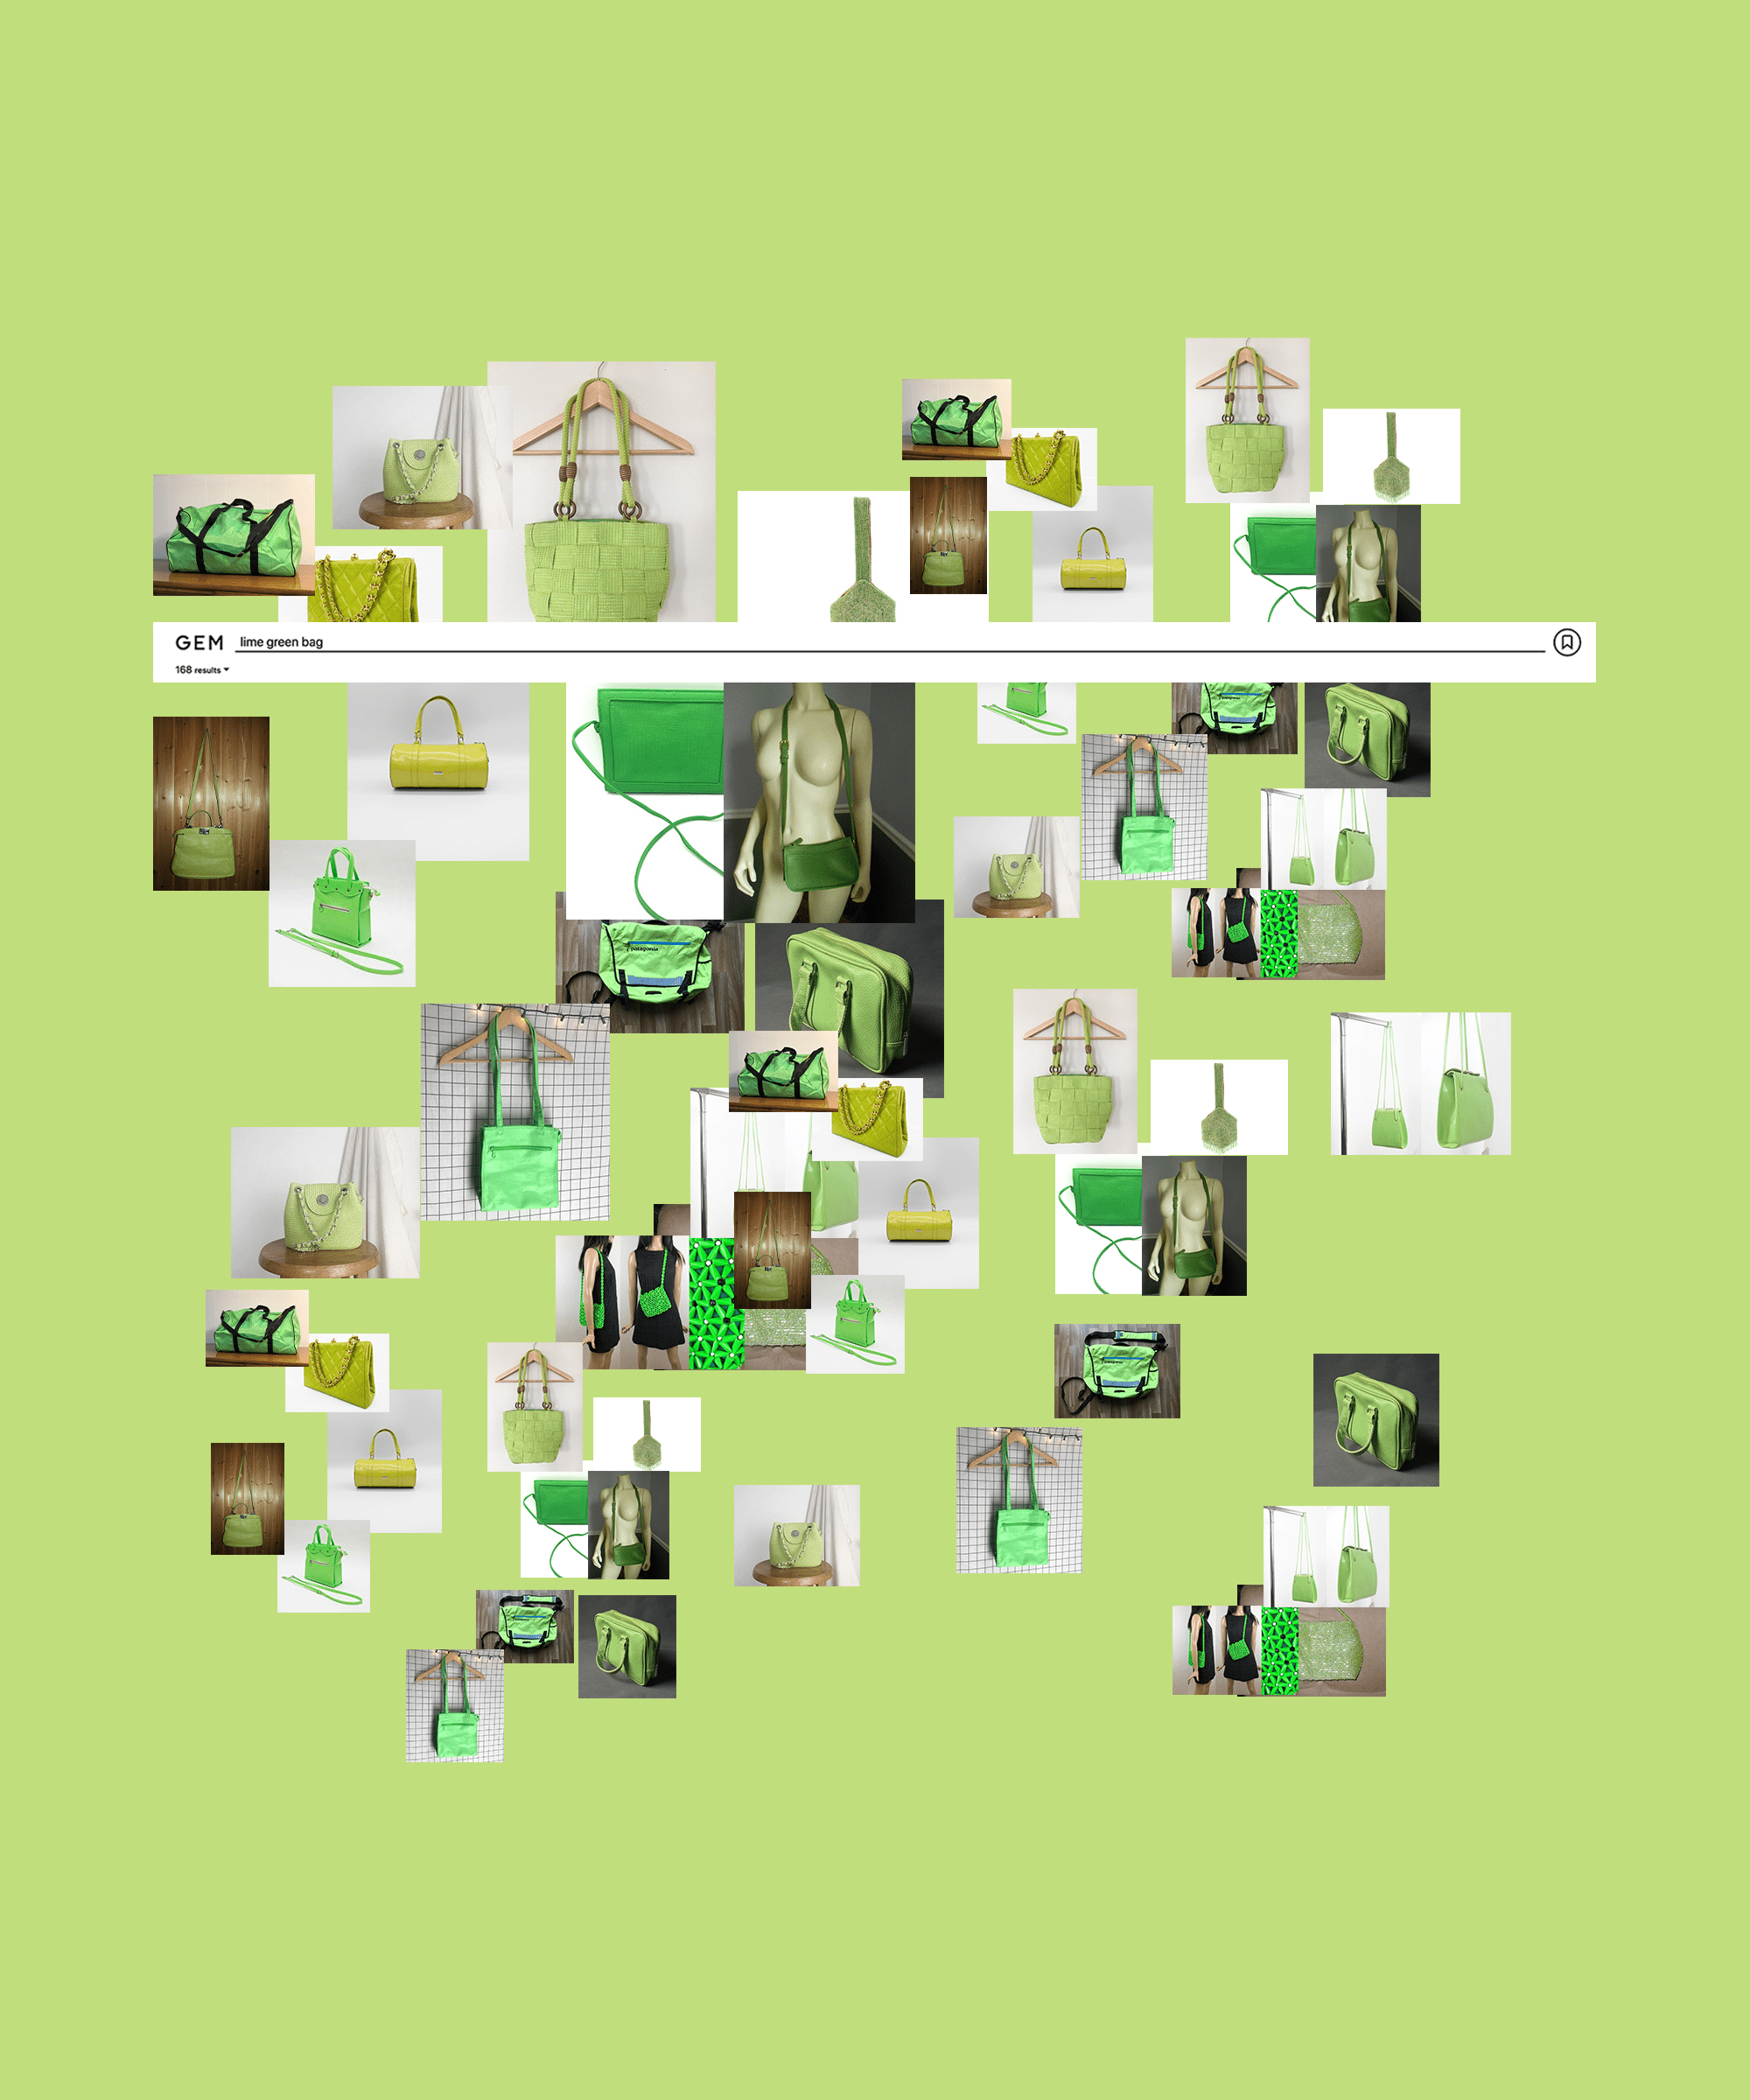 A mood board featuring a variety of green bags, shoes, and accessories. - Lime green